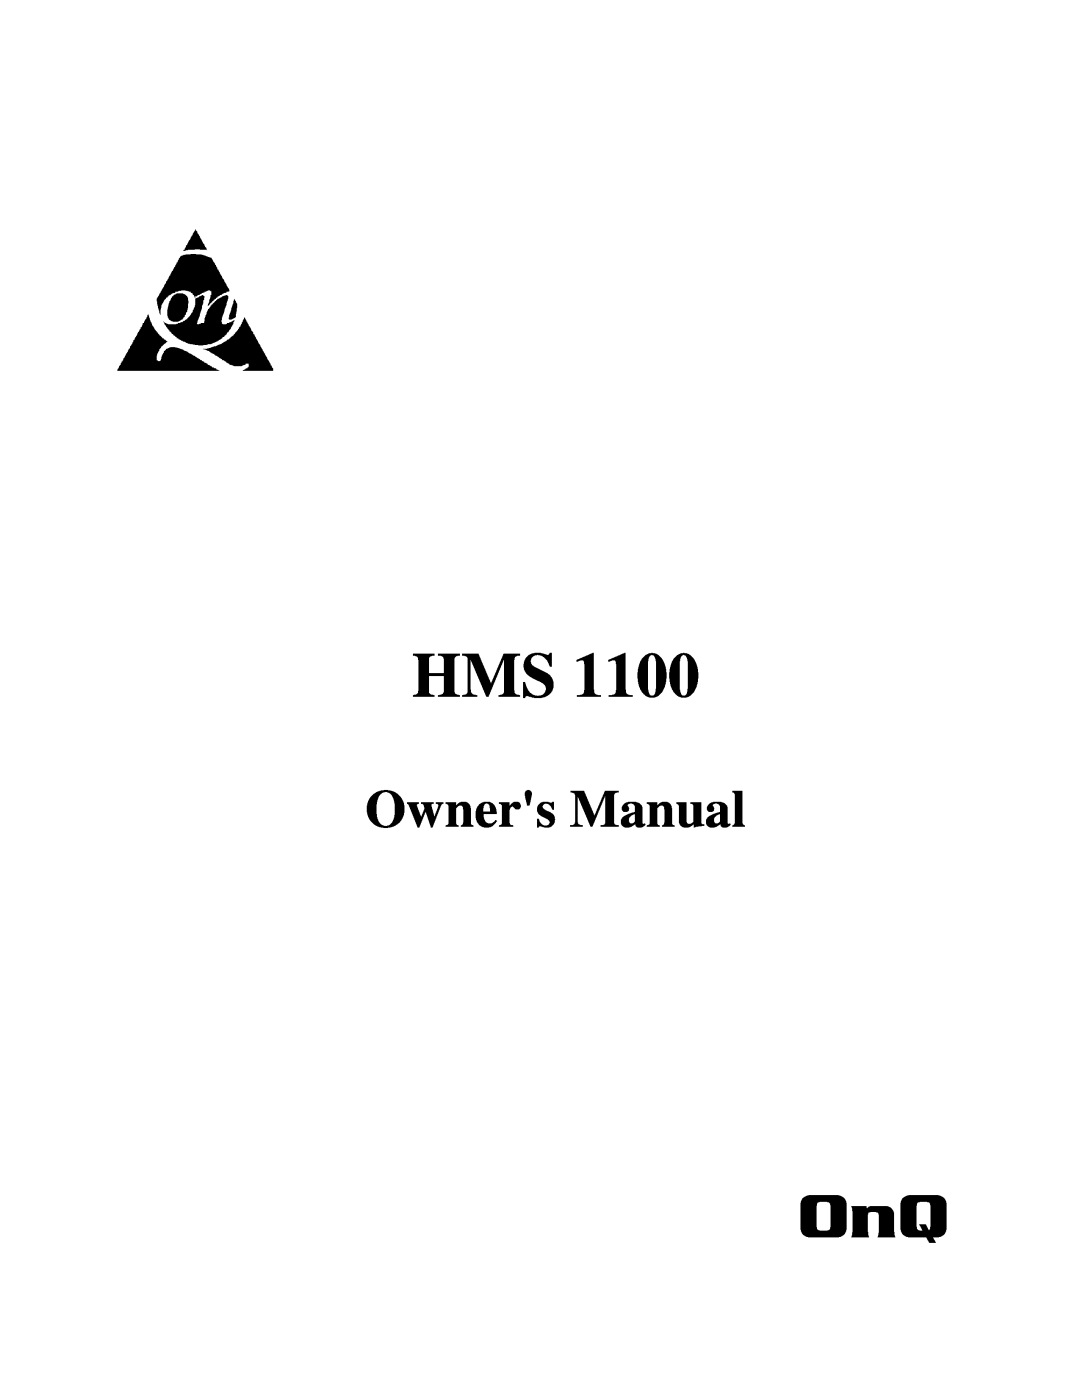 On-Q/Legrand HMS 1100 owner manual Owners Manual 